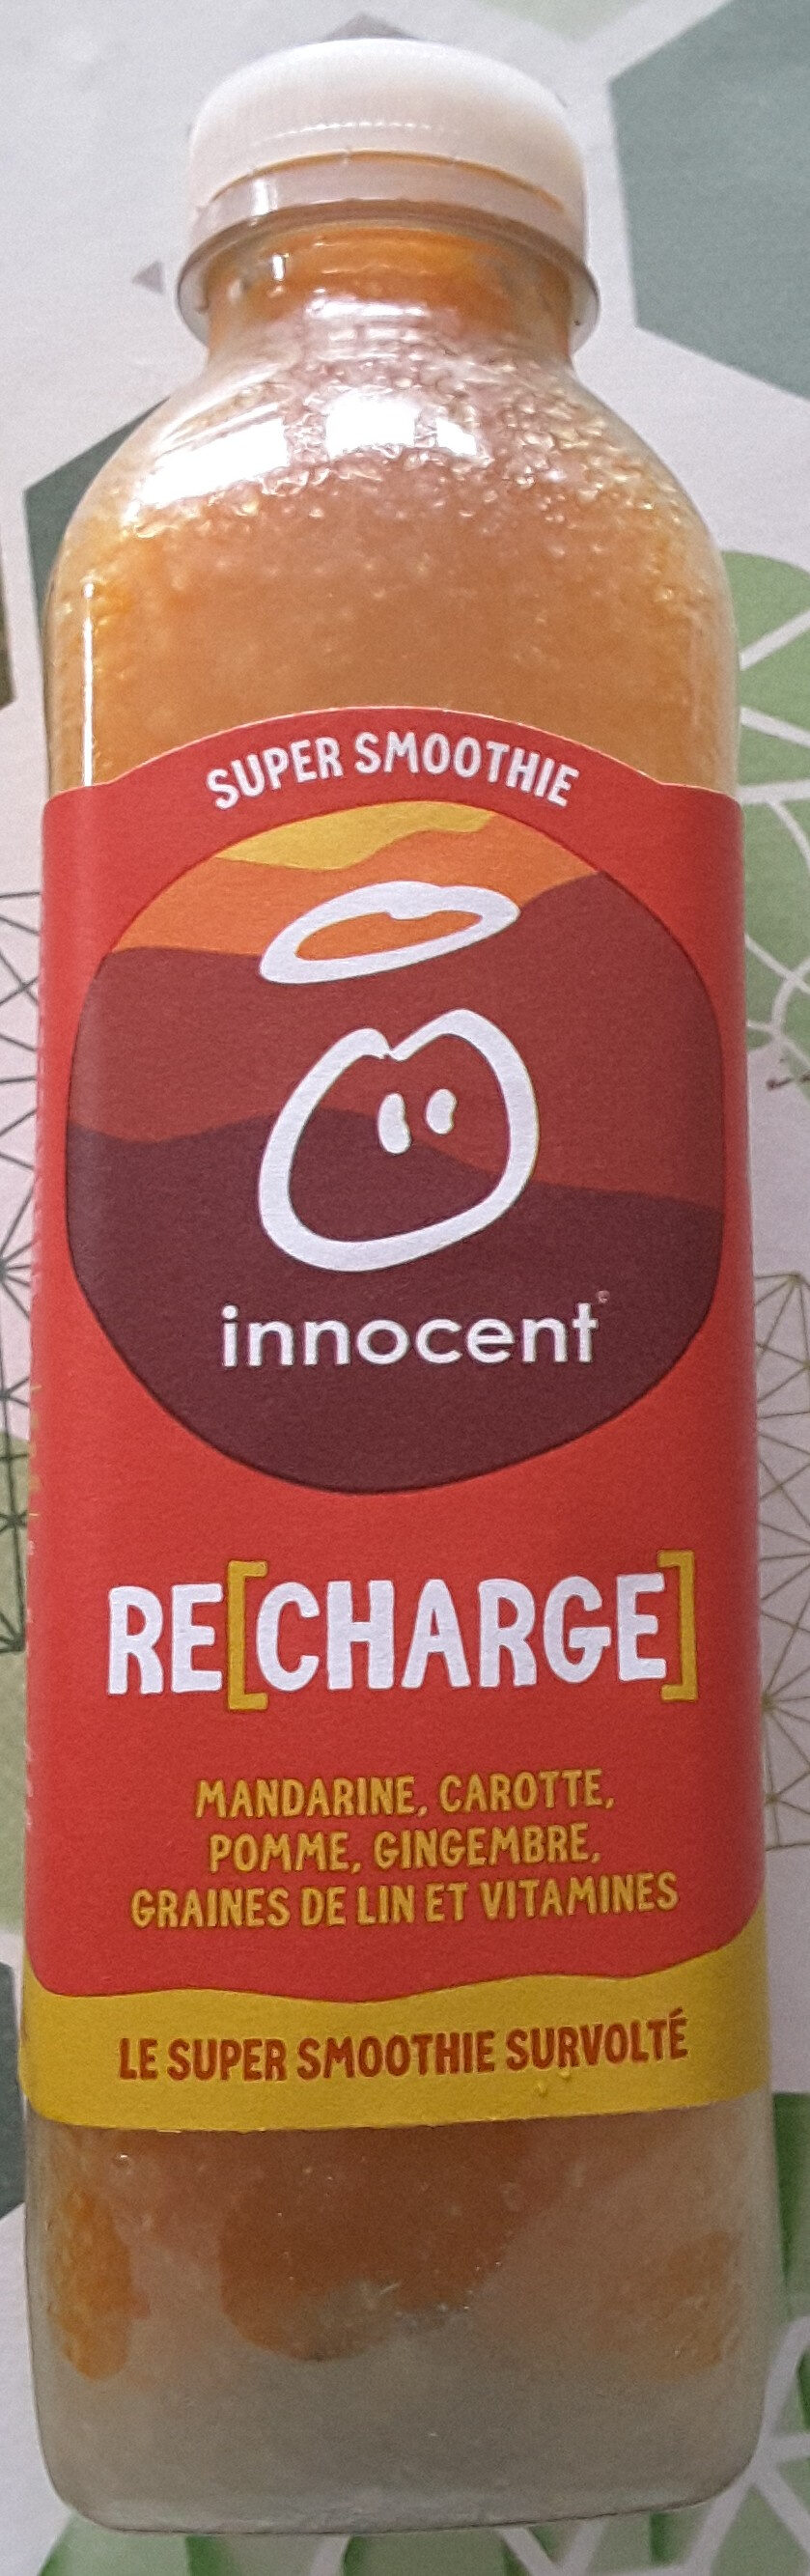 Innocent super smoothie recharge 750ml - Product - fr